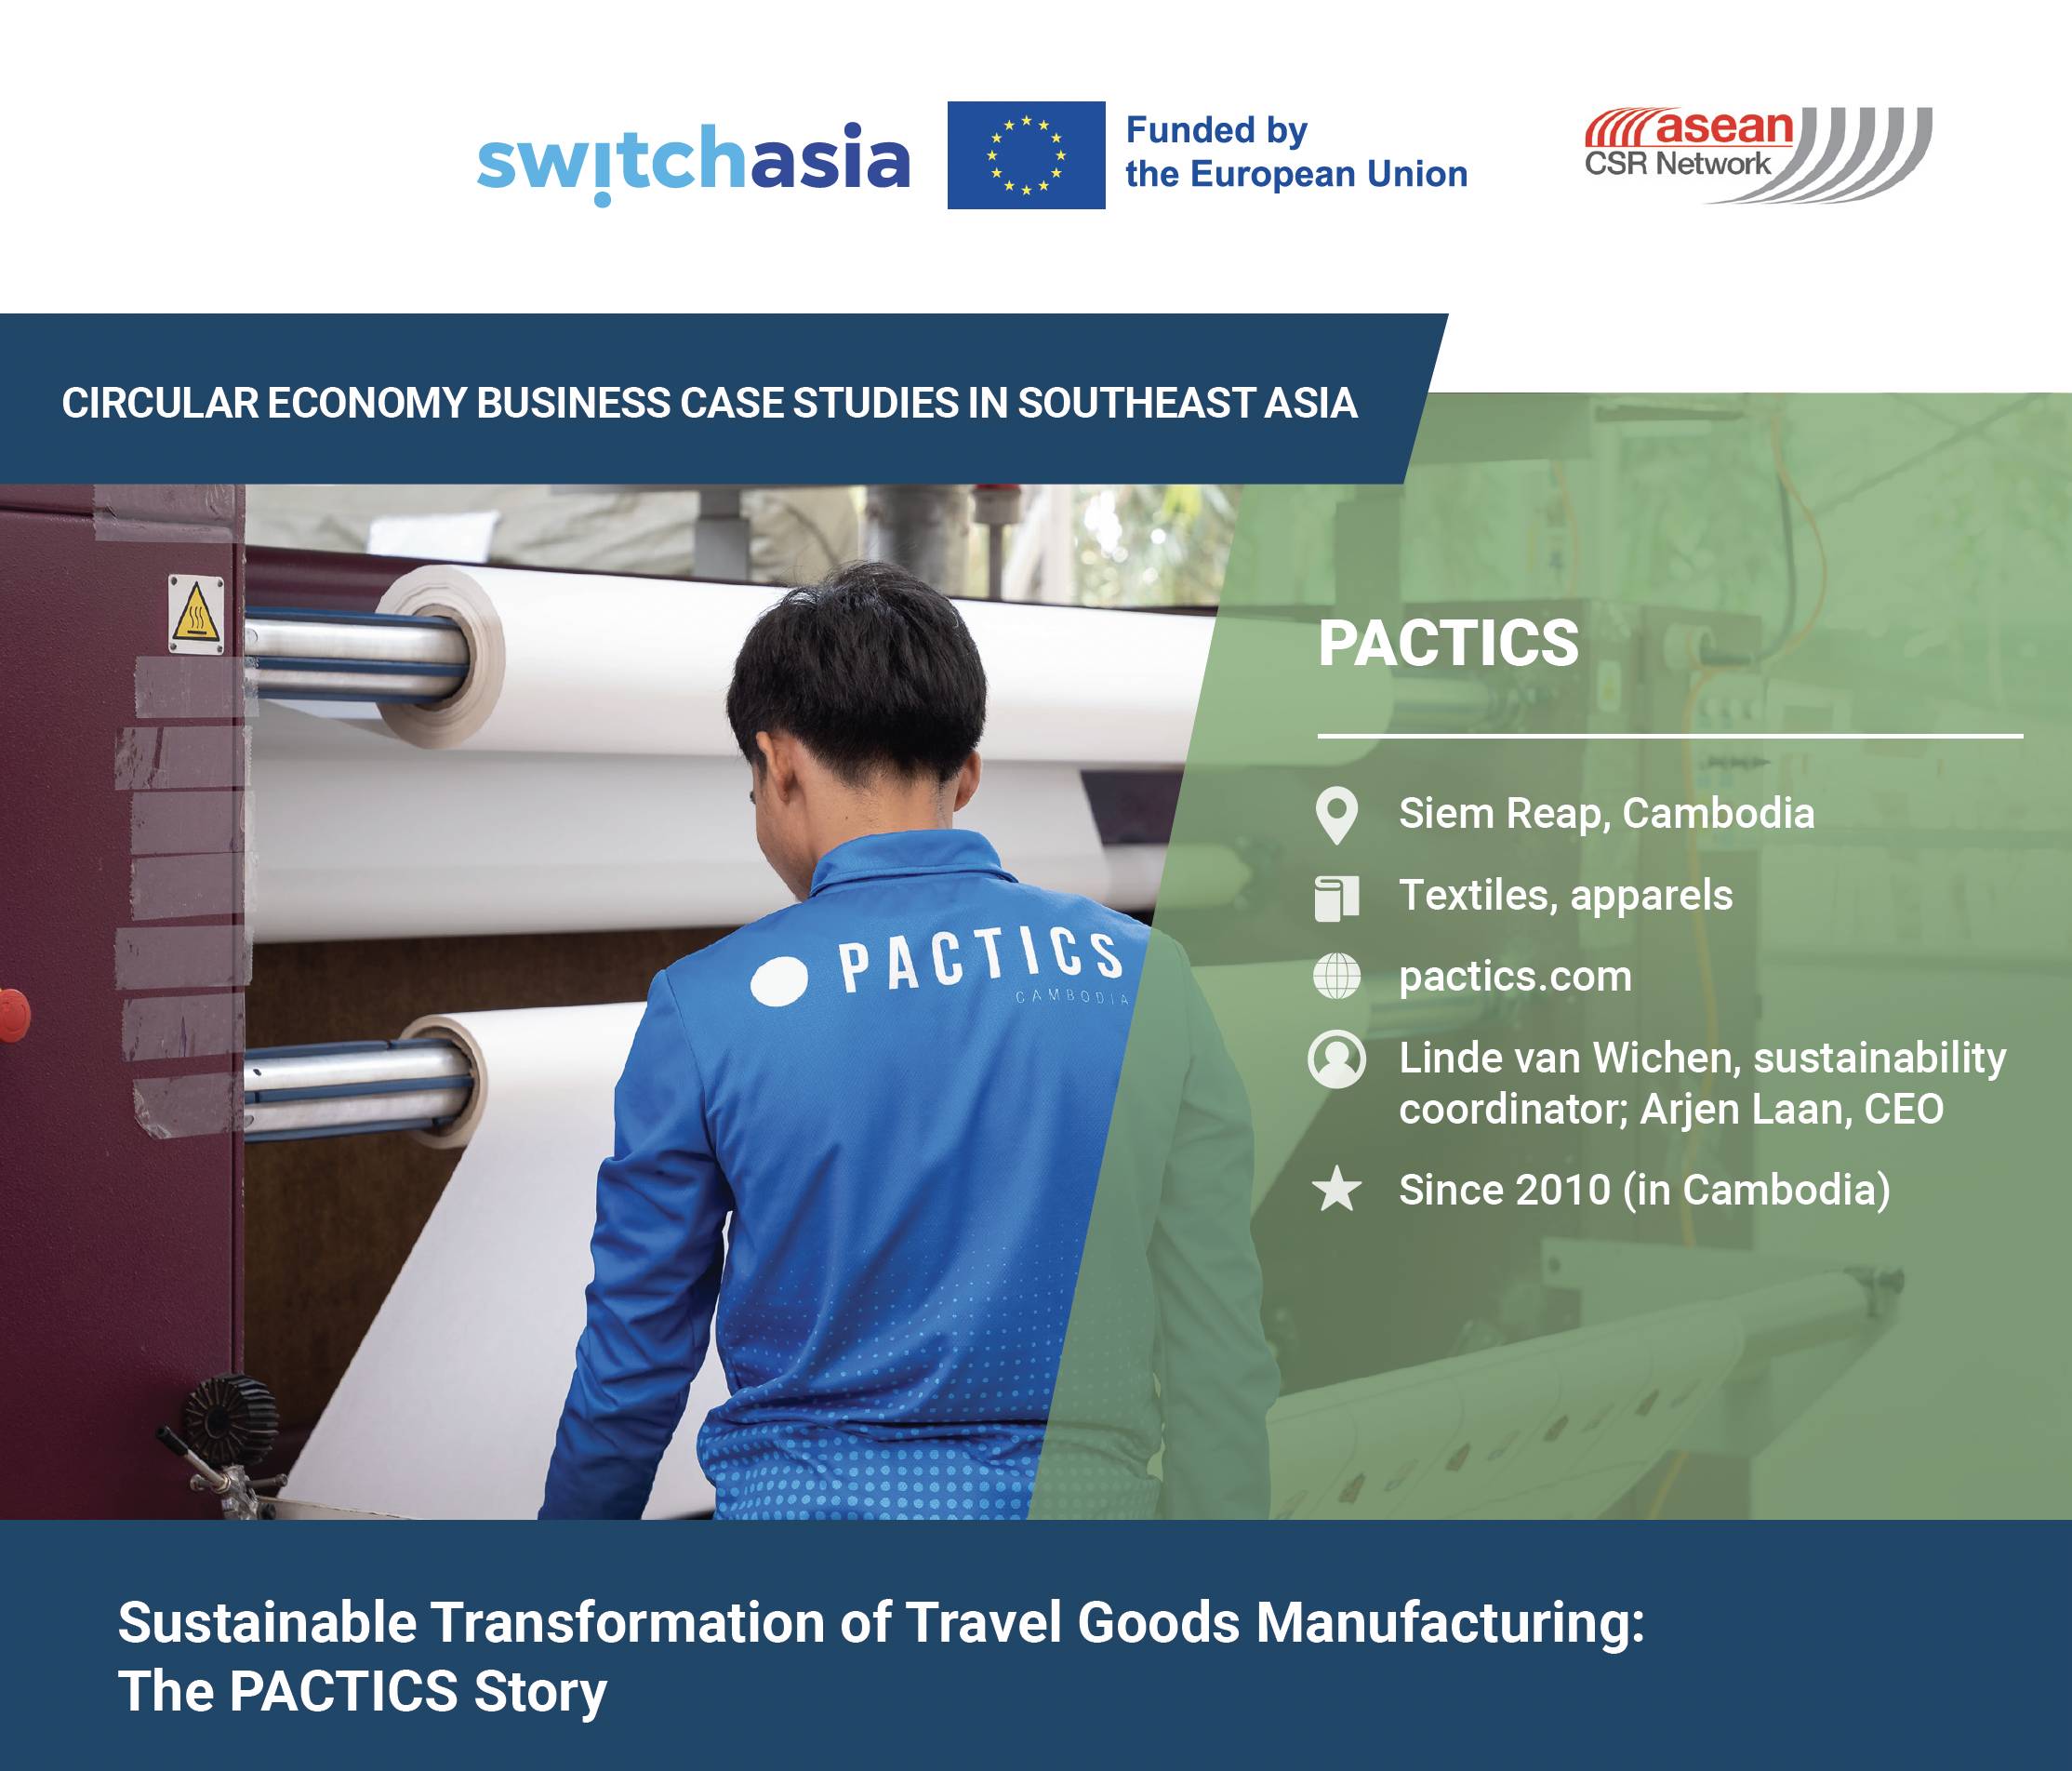 Sustainable Transformation of Travel Goods Manufacturing: The PACTICS Story